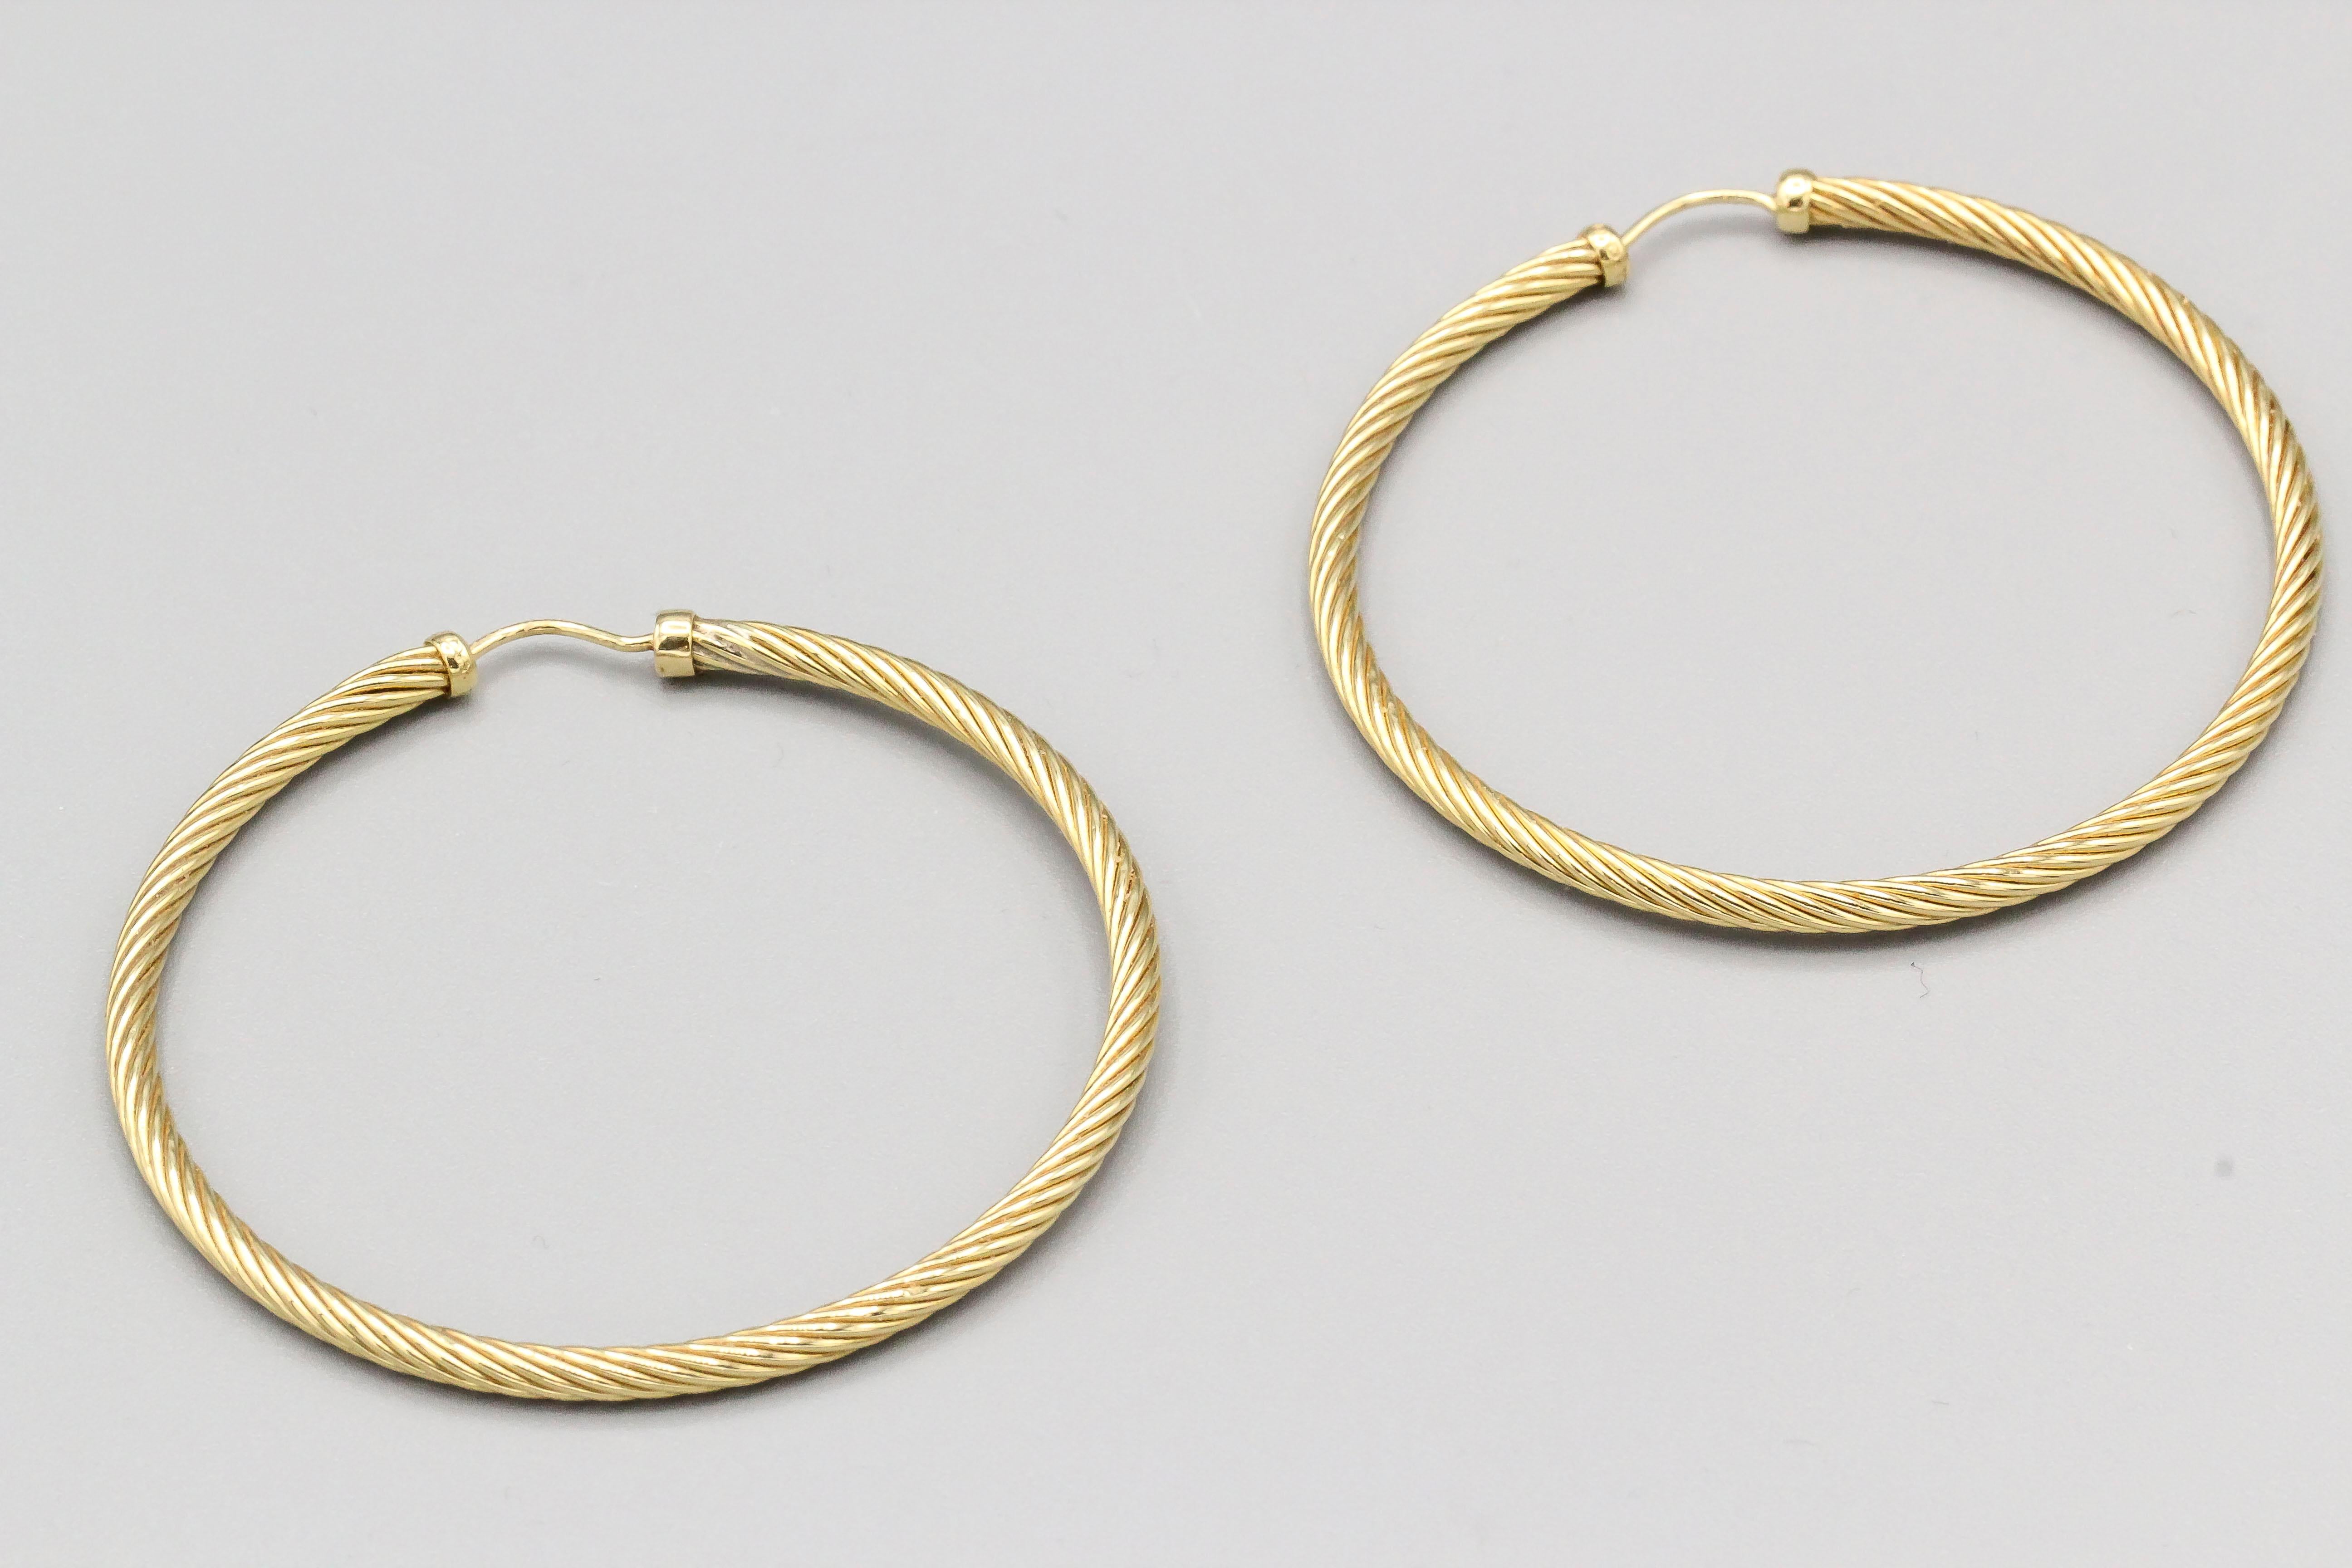 Fine large 18k gold cable hoop earrings by David Yurman. Approx. 2.25 inches in diameter, bigger than the current model sold.

Hallmarks: DY 750